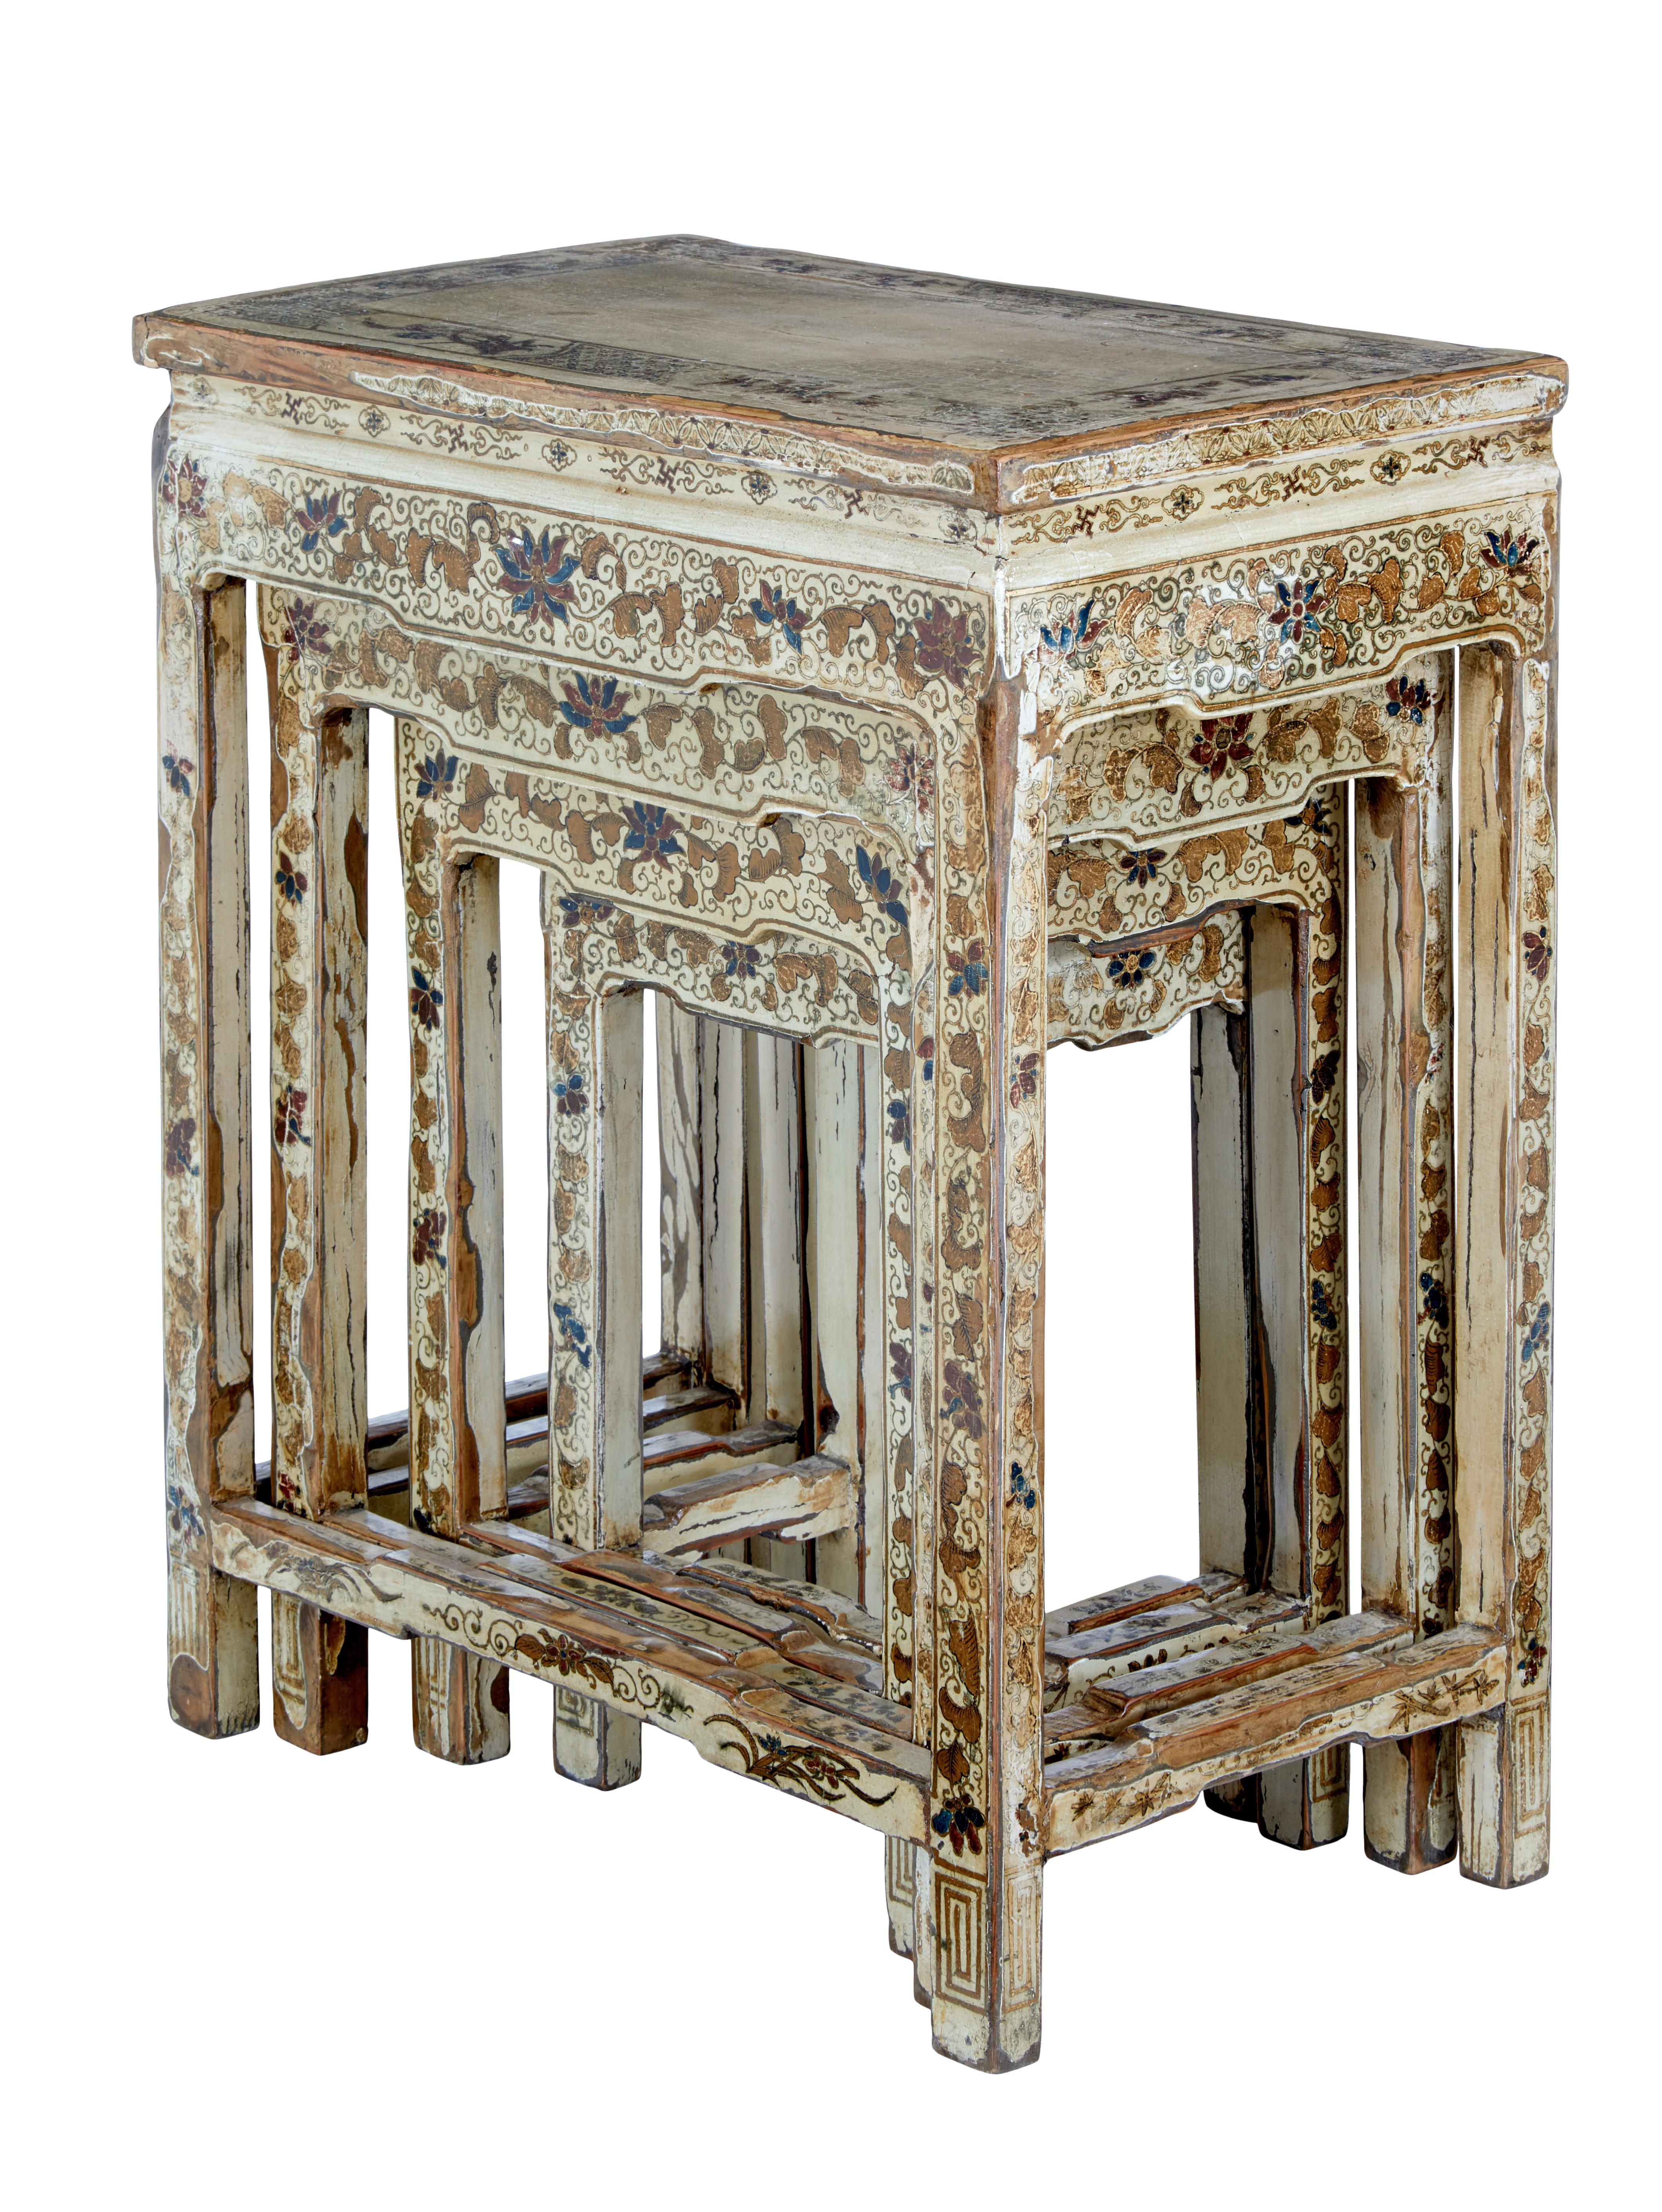 Early 20th century nest of 4 lacquered and decorated tables circa 1900.

Stunning set of 4 Chinese export nesting tables. Each profusely hand decorated with paint and gold leaf. Each standing on 4 legs with a back stretcher making these nesting,